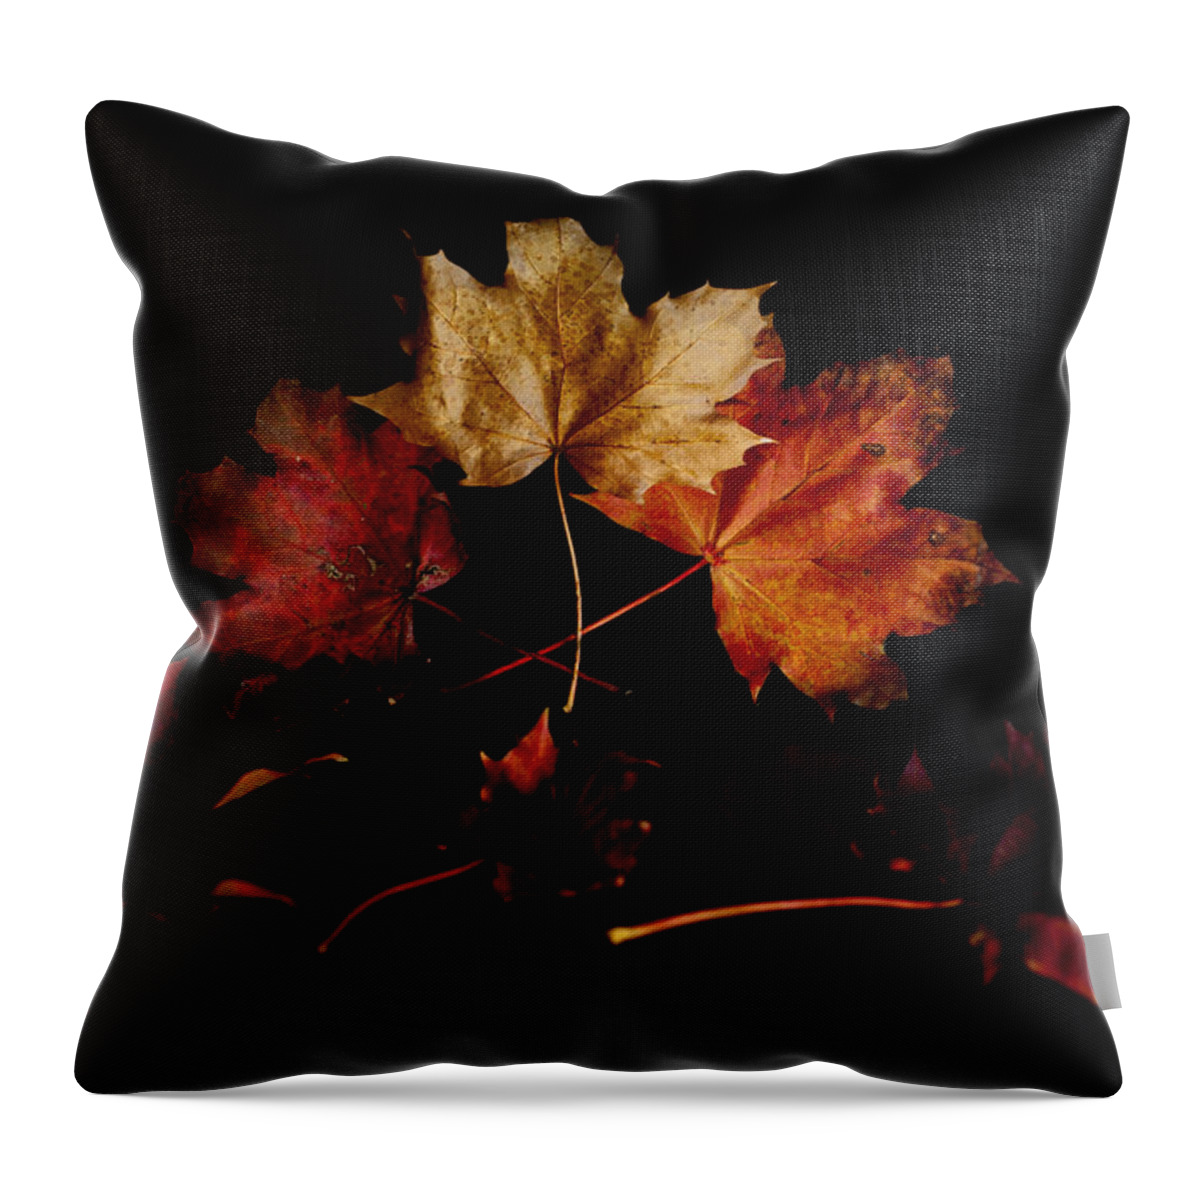 Autumn Throw Pillow featuring the photograph Autumn Leaves by B Cash